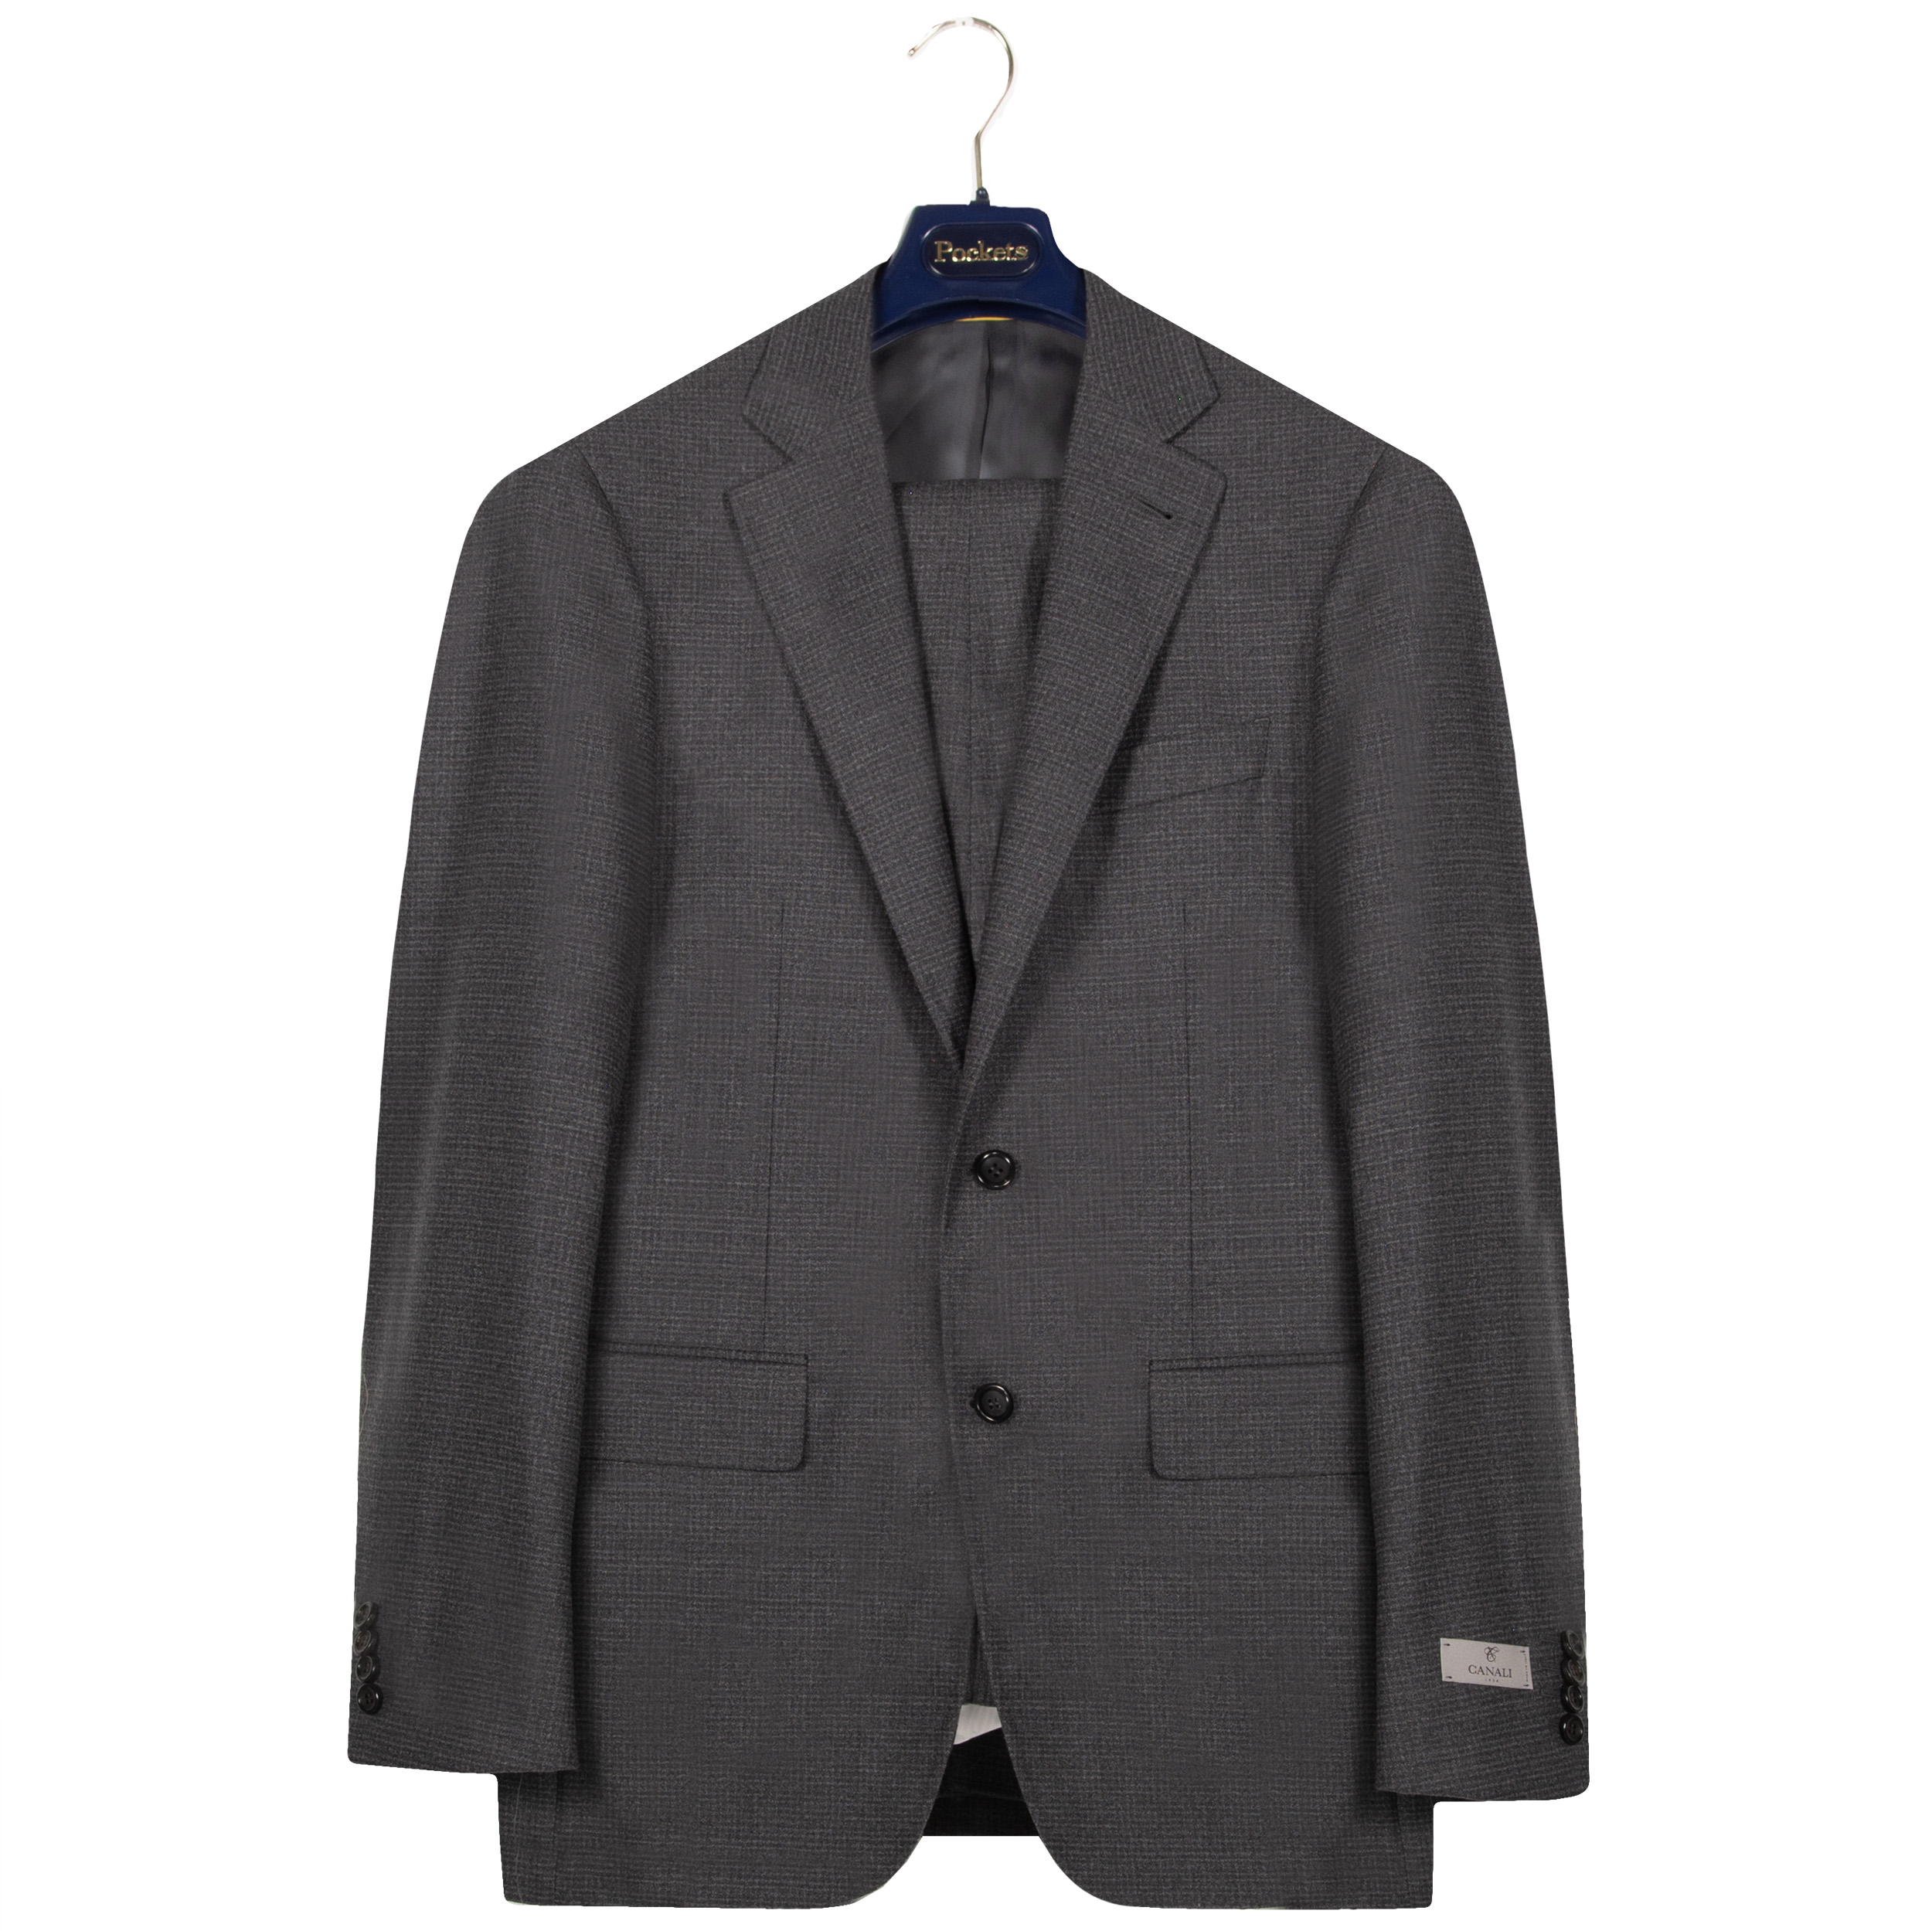 Canali Kei Stretch Wool Micro Patterned Suit Grey